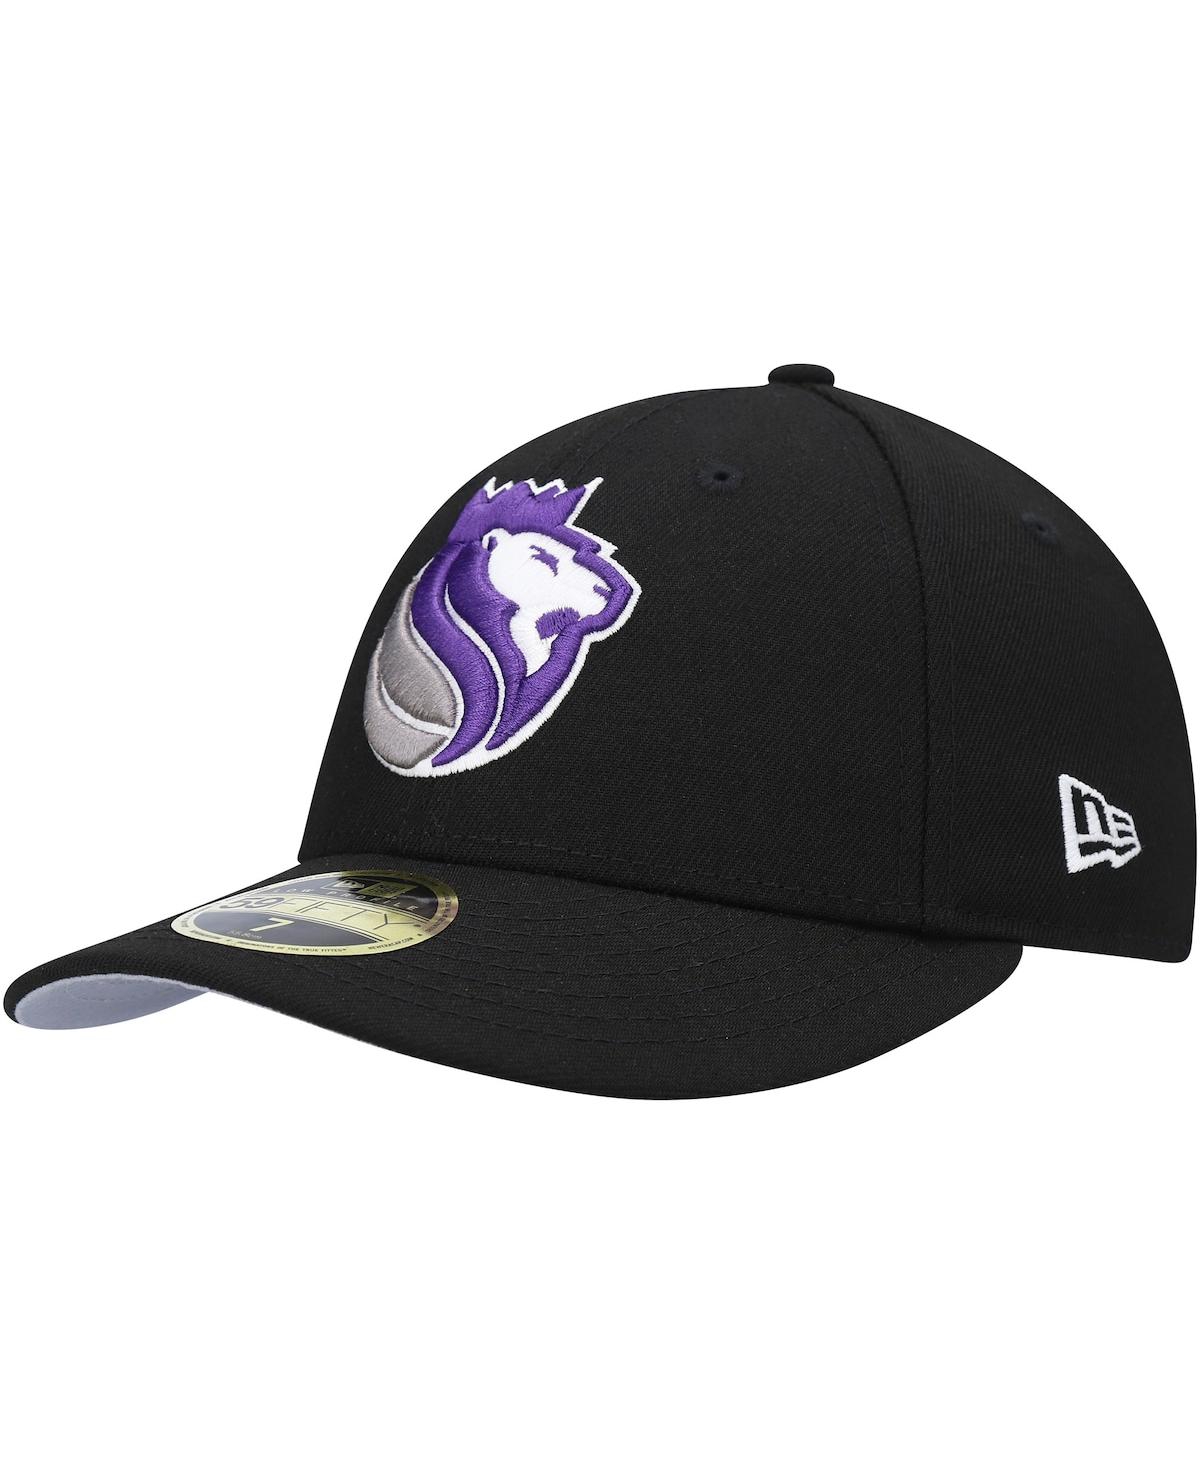 Men's Black Sacramento Kings Team Low Profile 59FIFTY Fitted Hat - Black